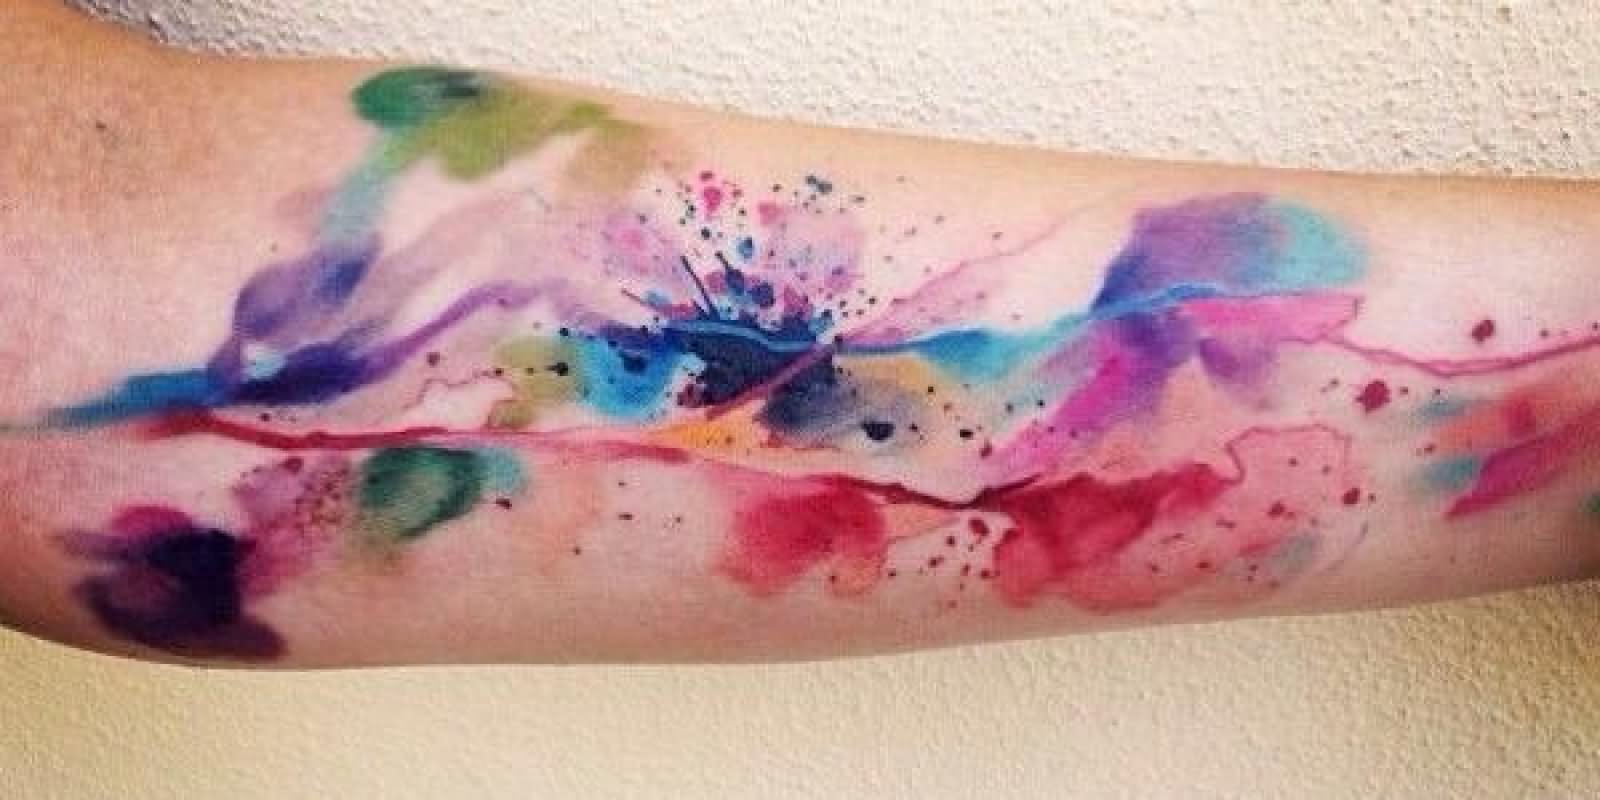 Watercolor Tattoo On Forearm